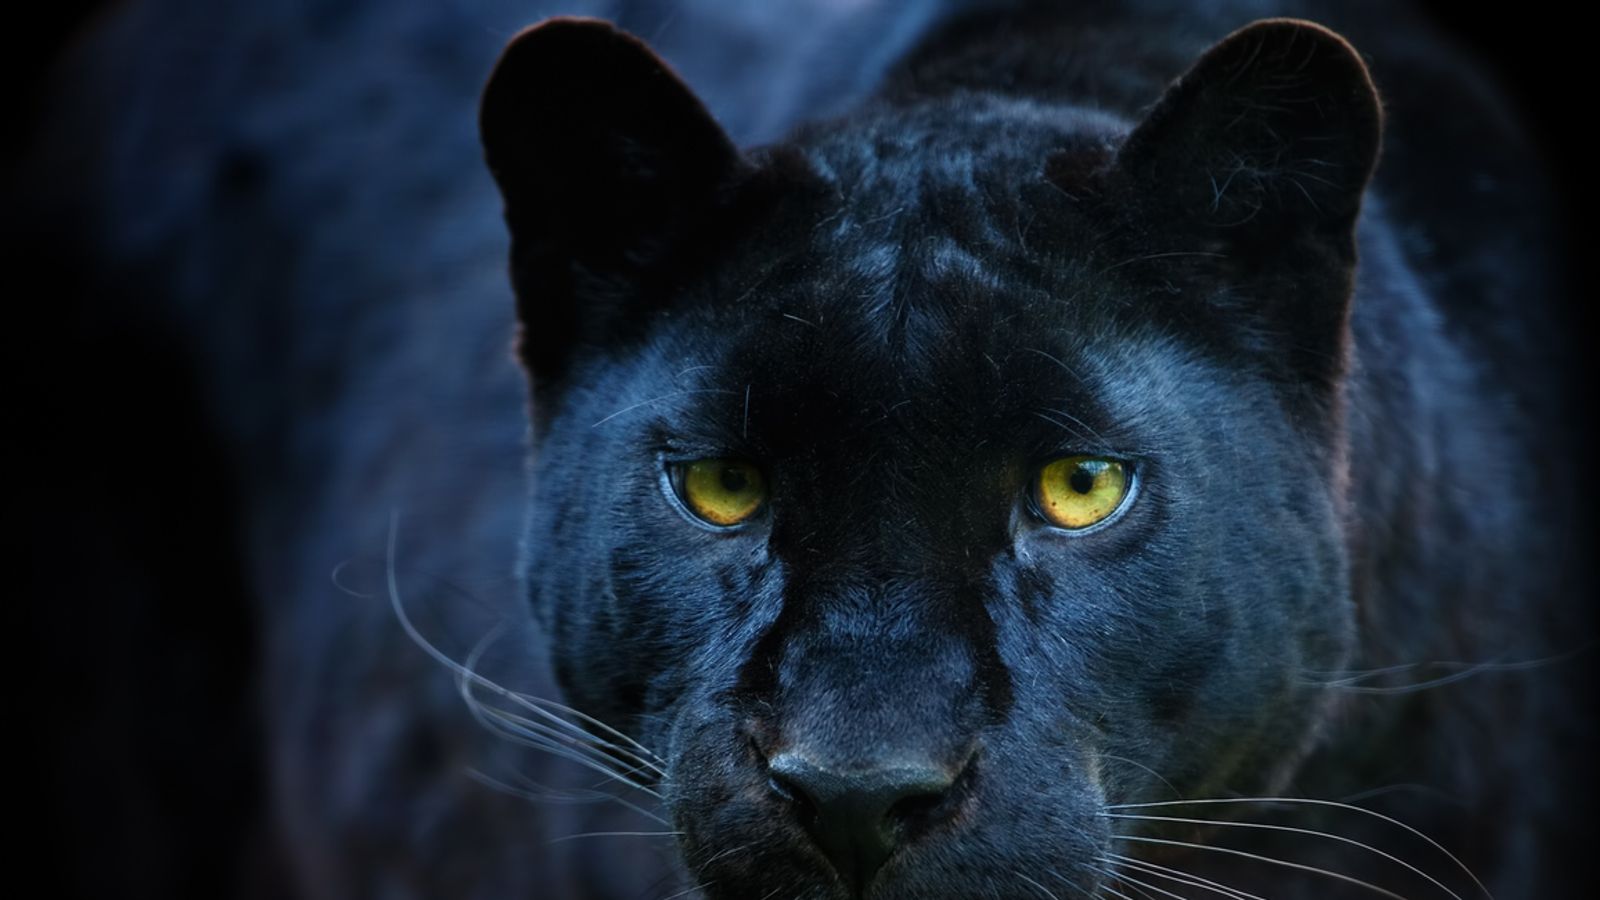 Feline daft? Big cat on the loose 'is not a panther' | UK News | Sky News